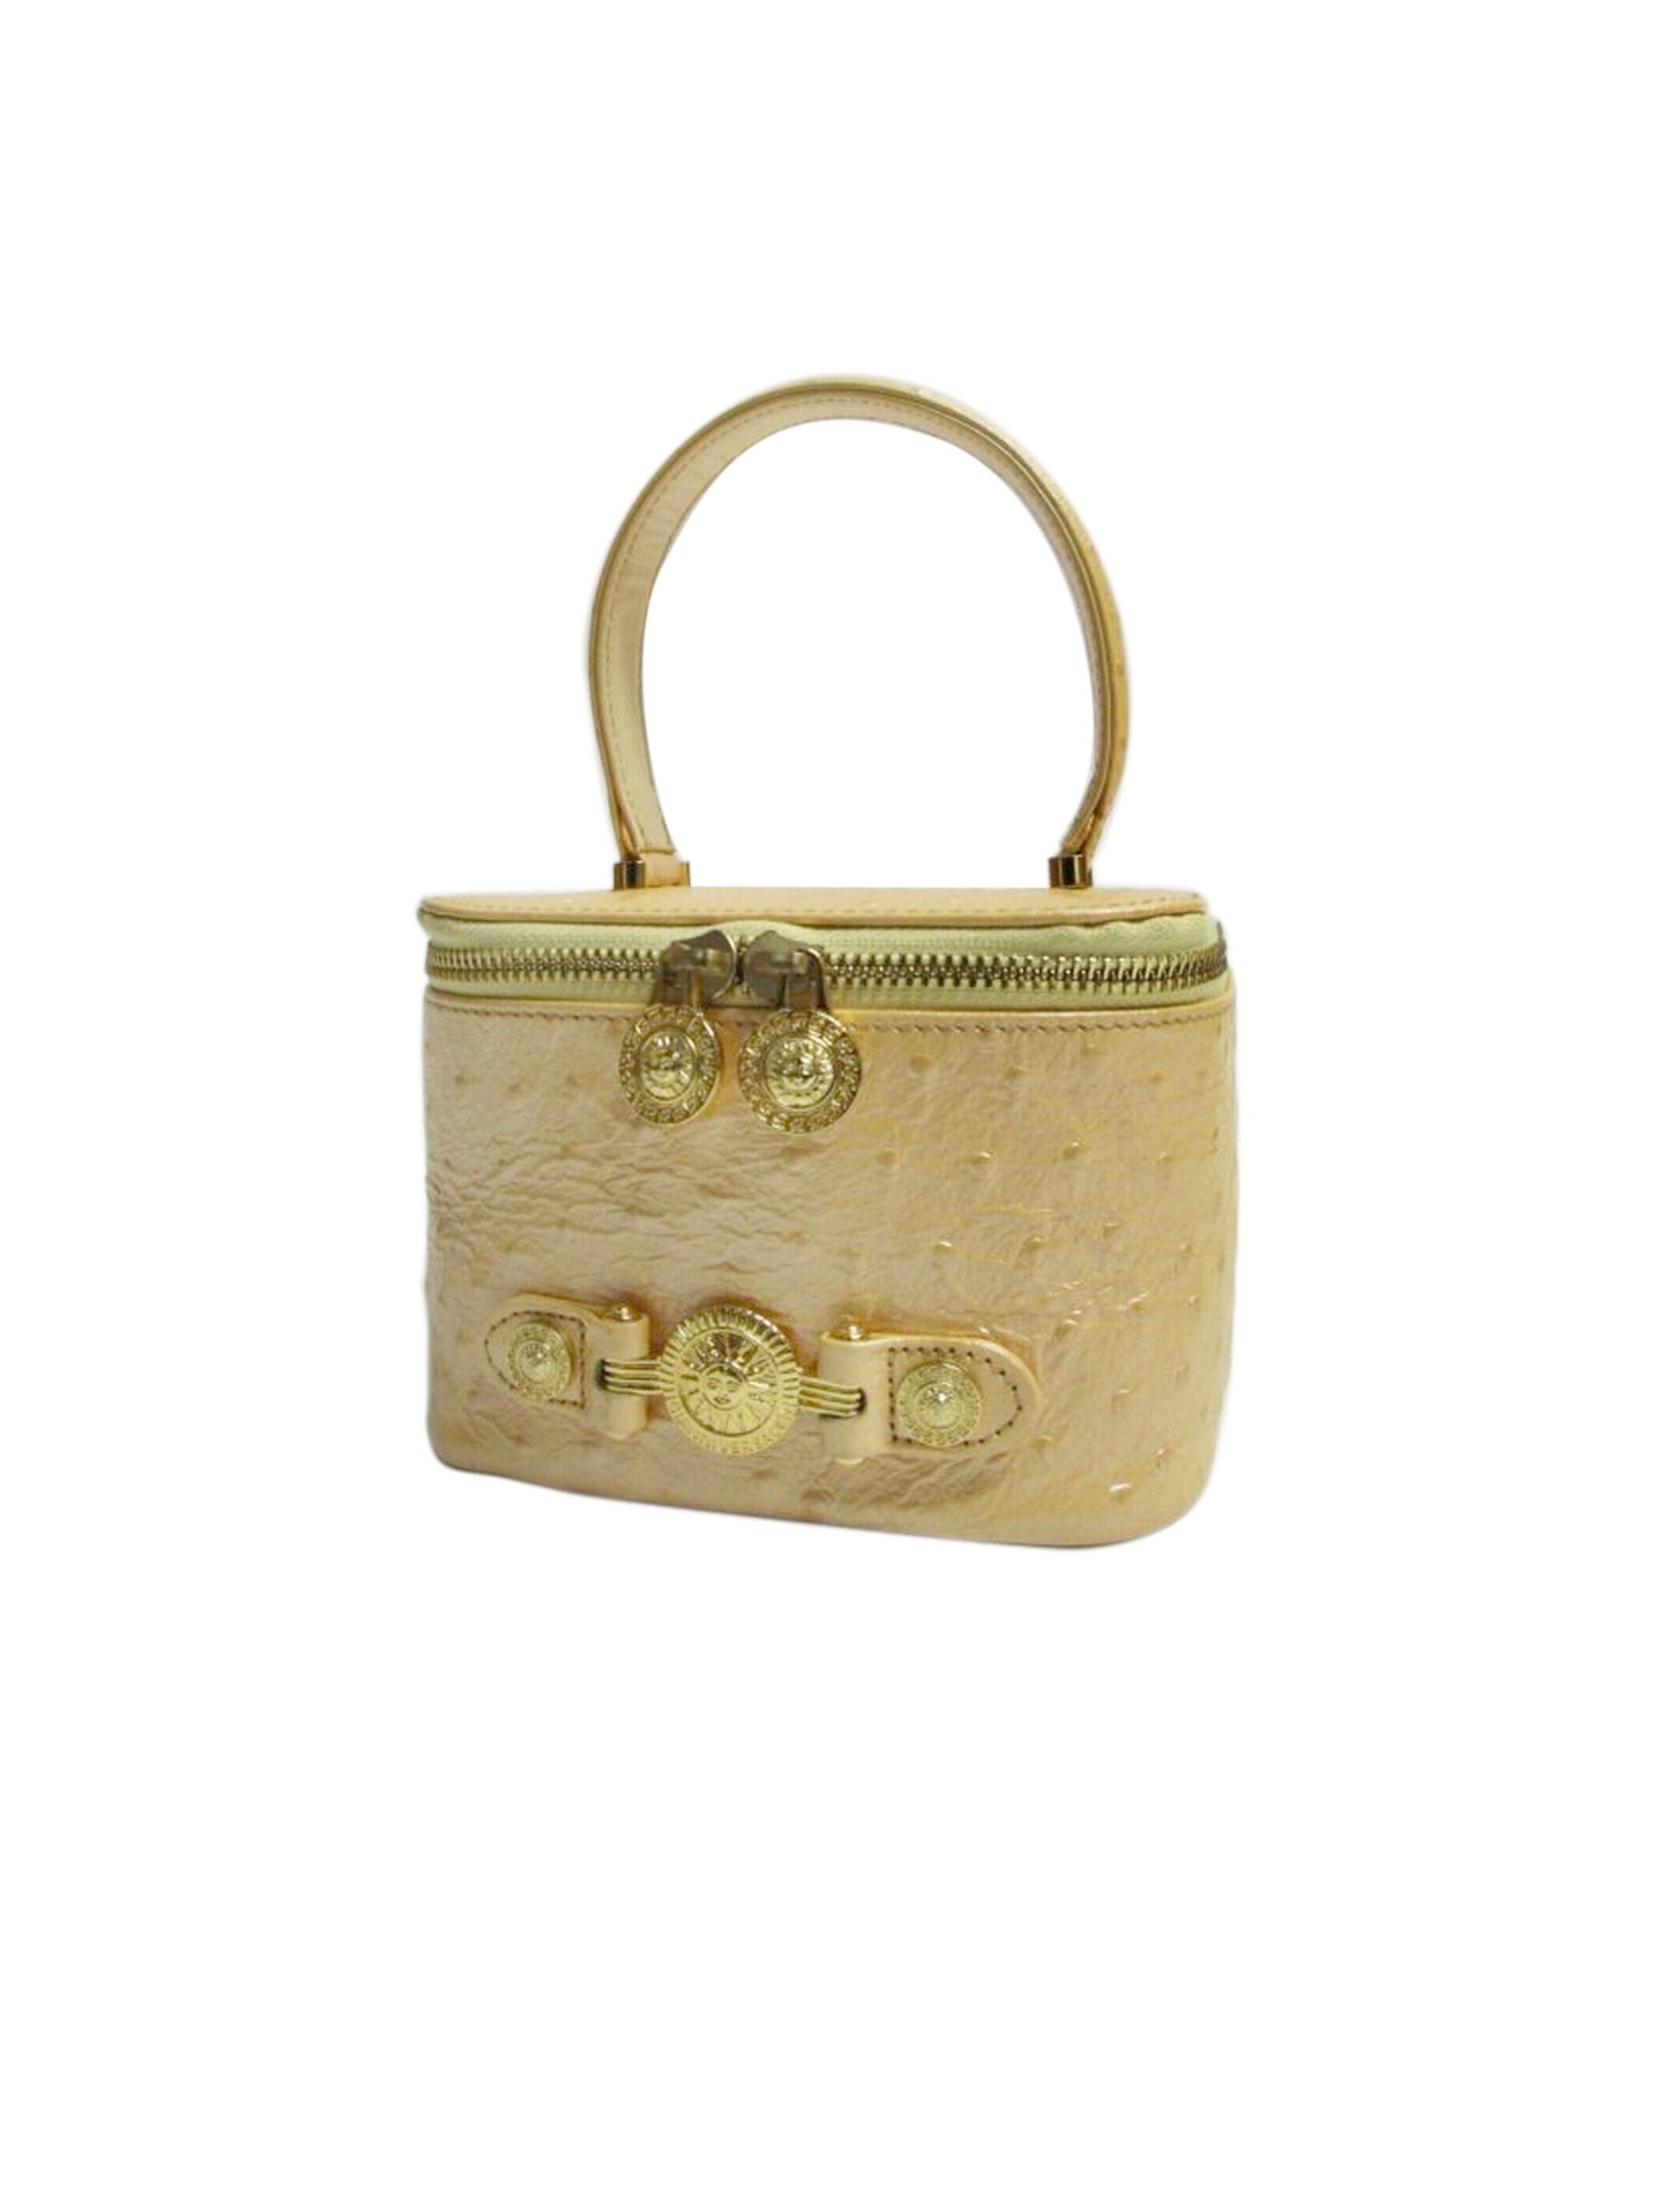 Gianni Versace 2000s Beige Ostrich Leather Vanity Bag